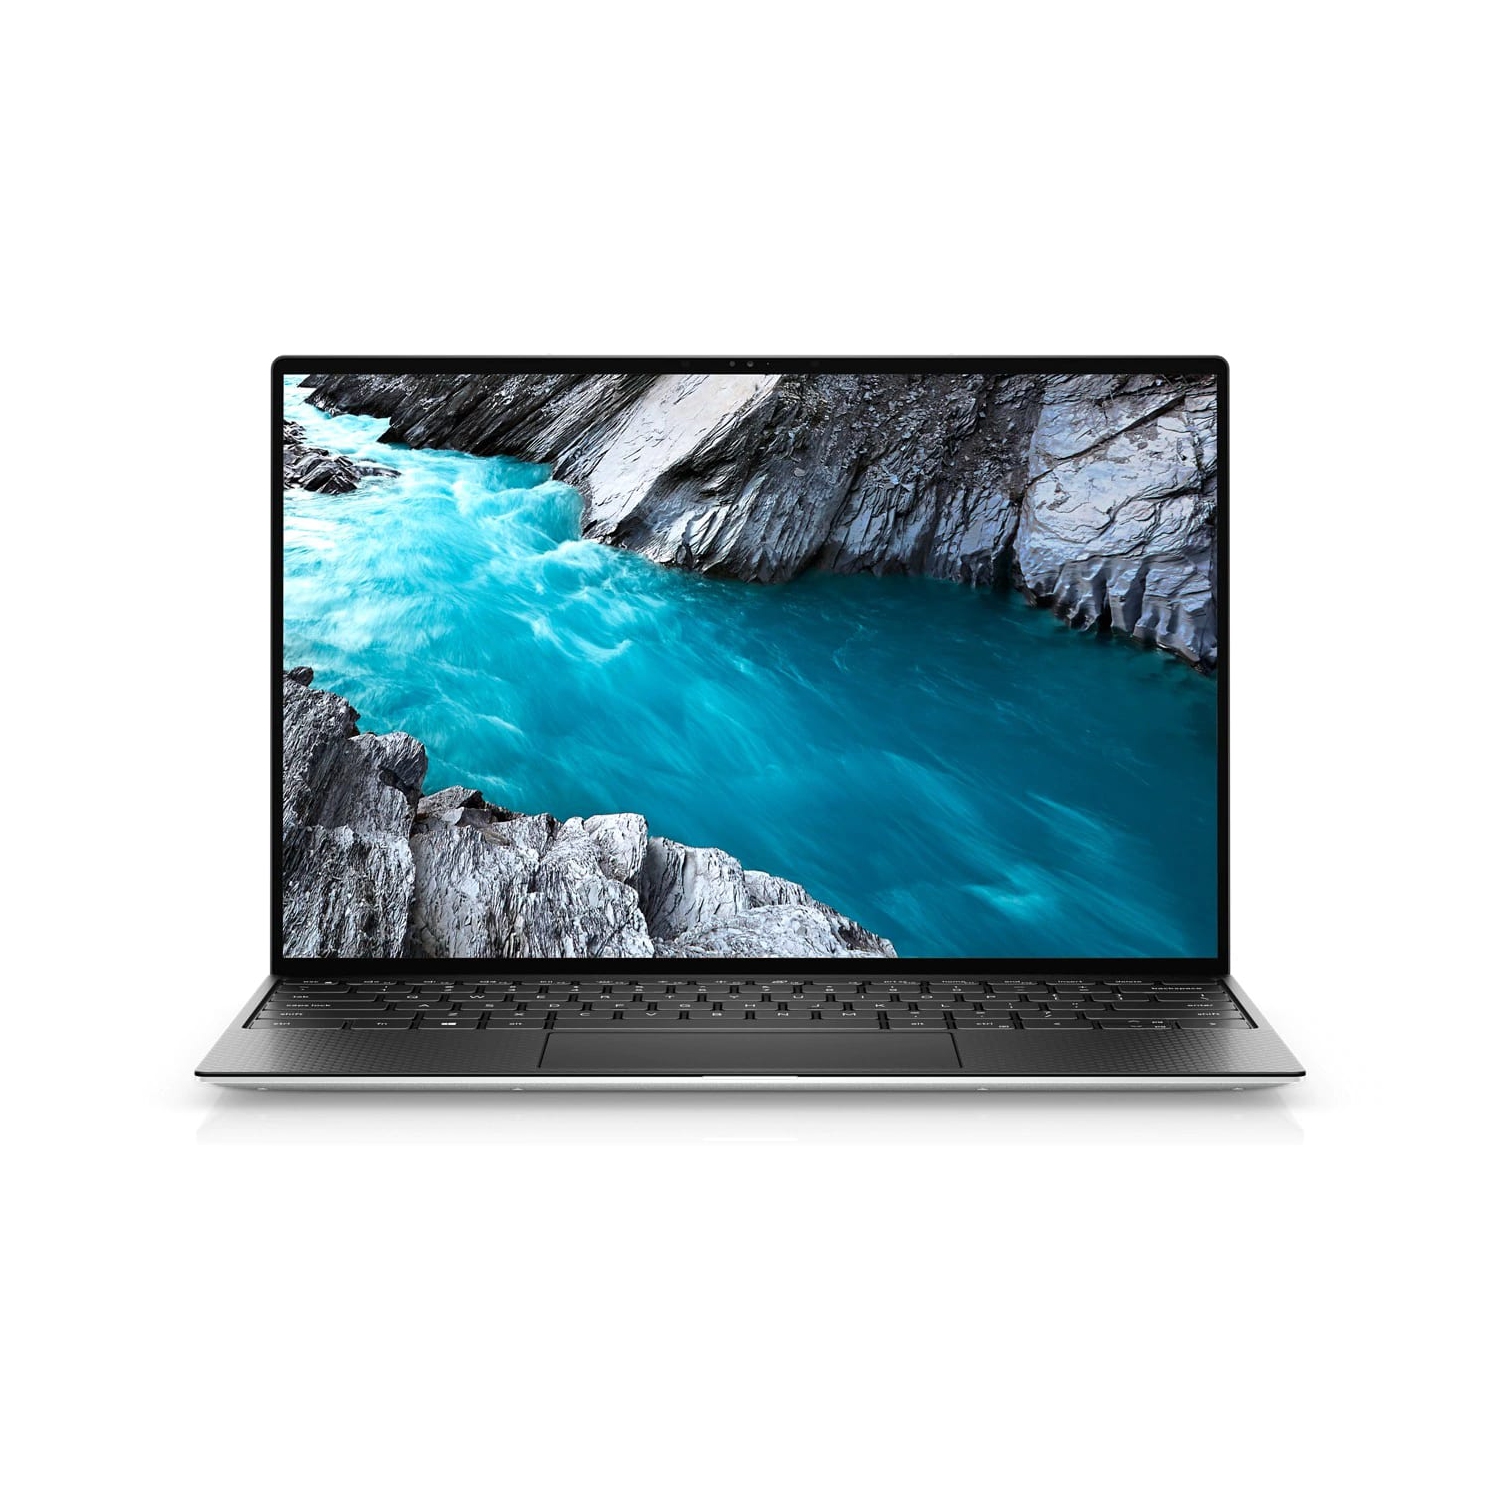 Refurbished (Excellent) - Dell XPS 13 9310 Laptop (2020) | 13.4" FHD+ Touch | Core i7 - 1TB SSD - 16GB RAM | 4 Cores @ 4.4 GHz - 11th Gen CPU Certified Refurbished